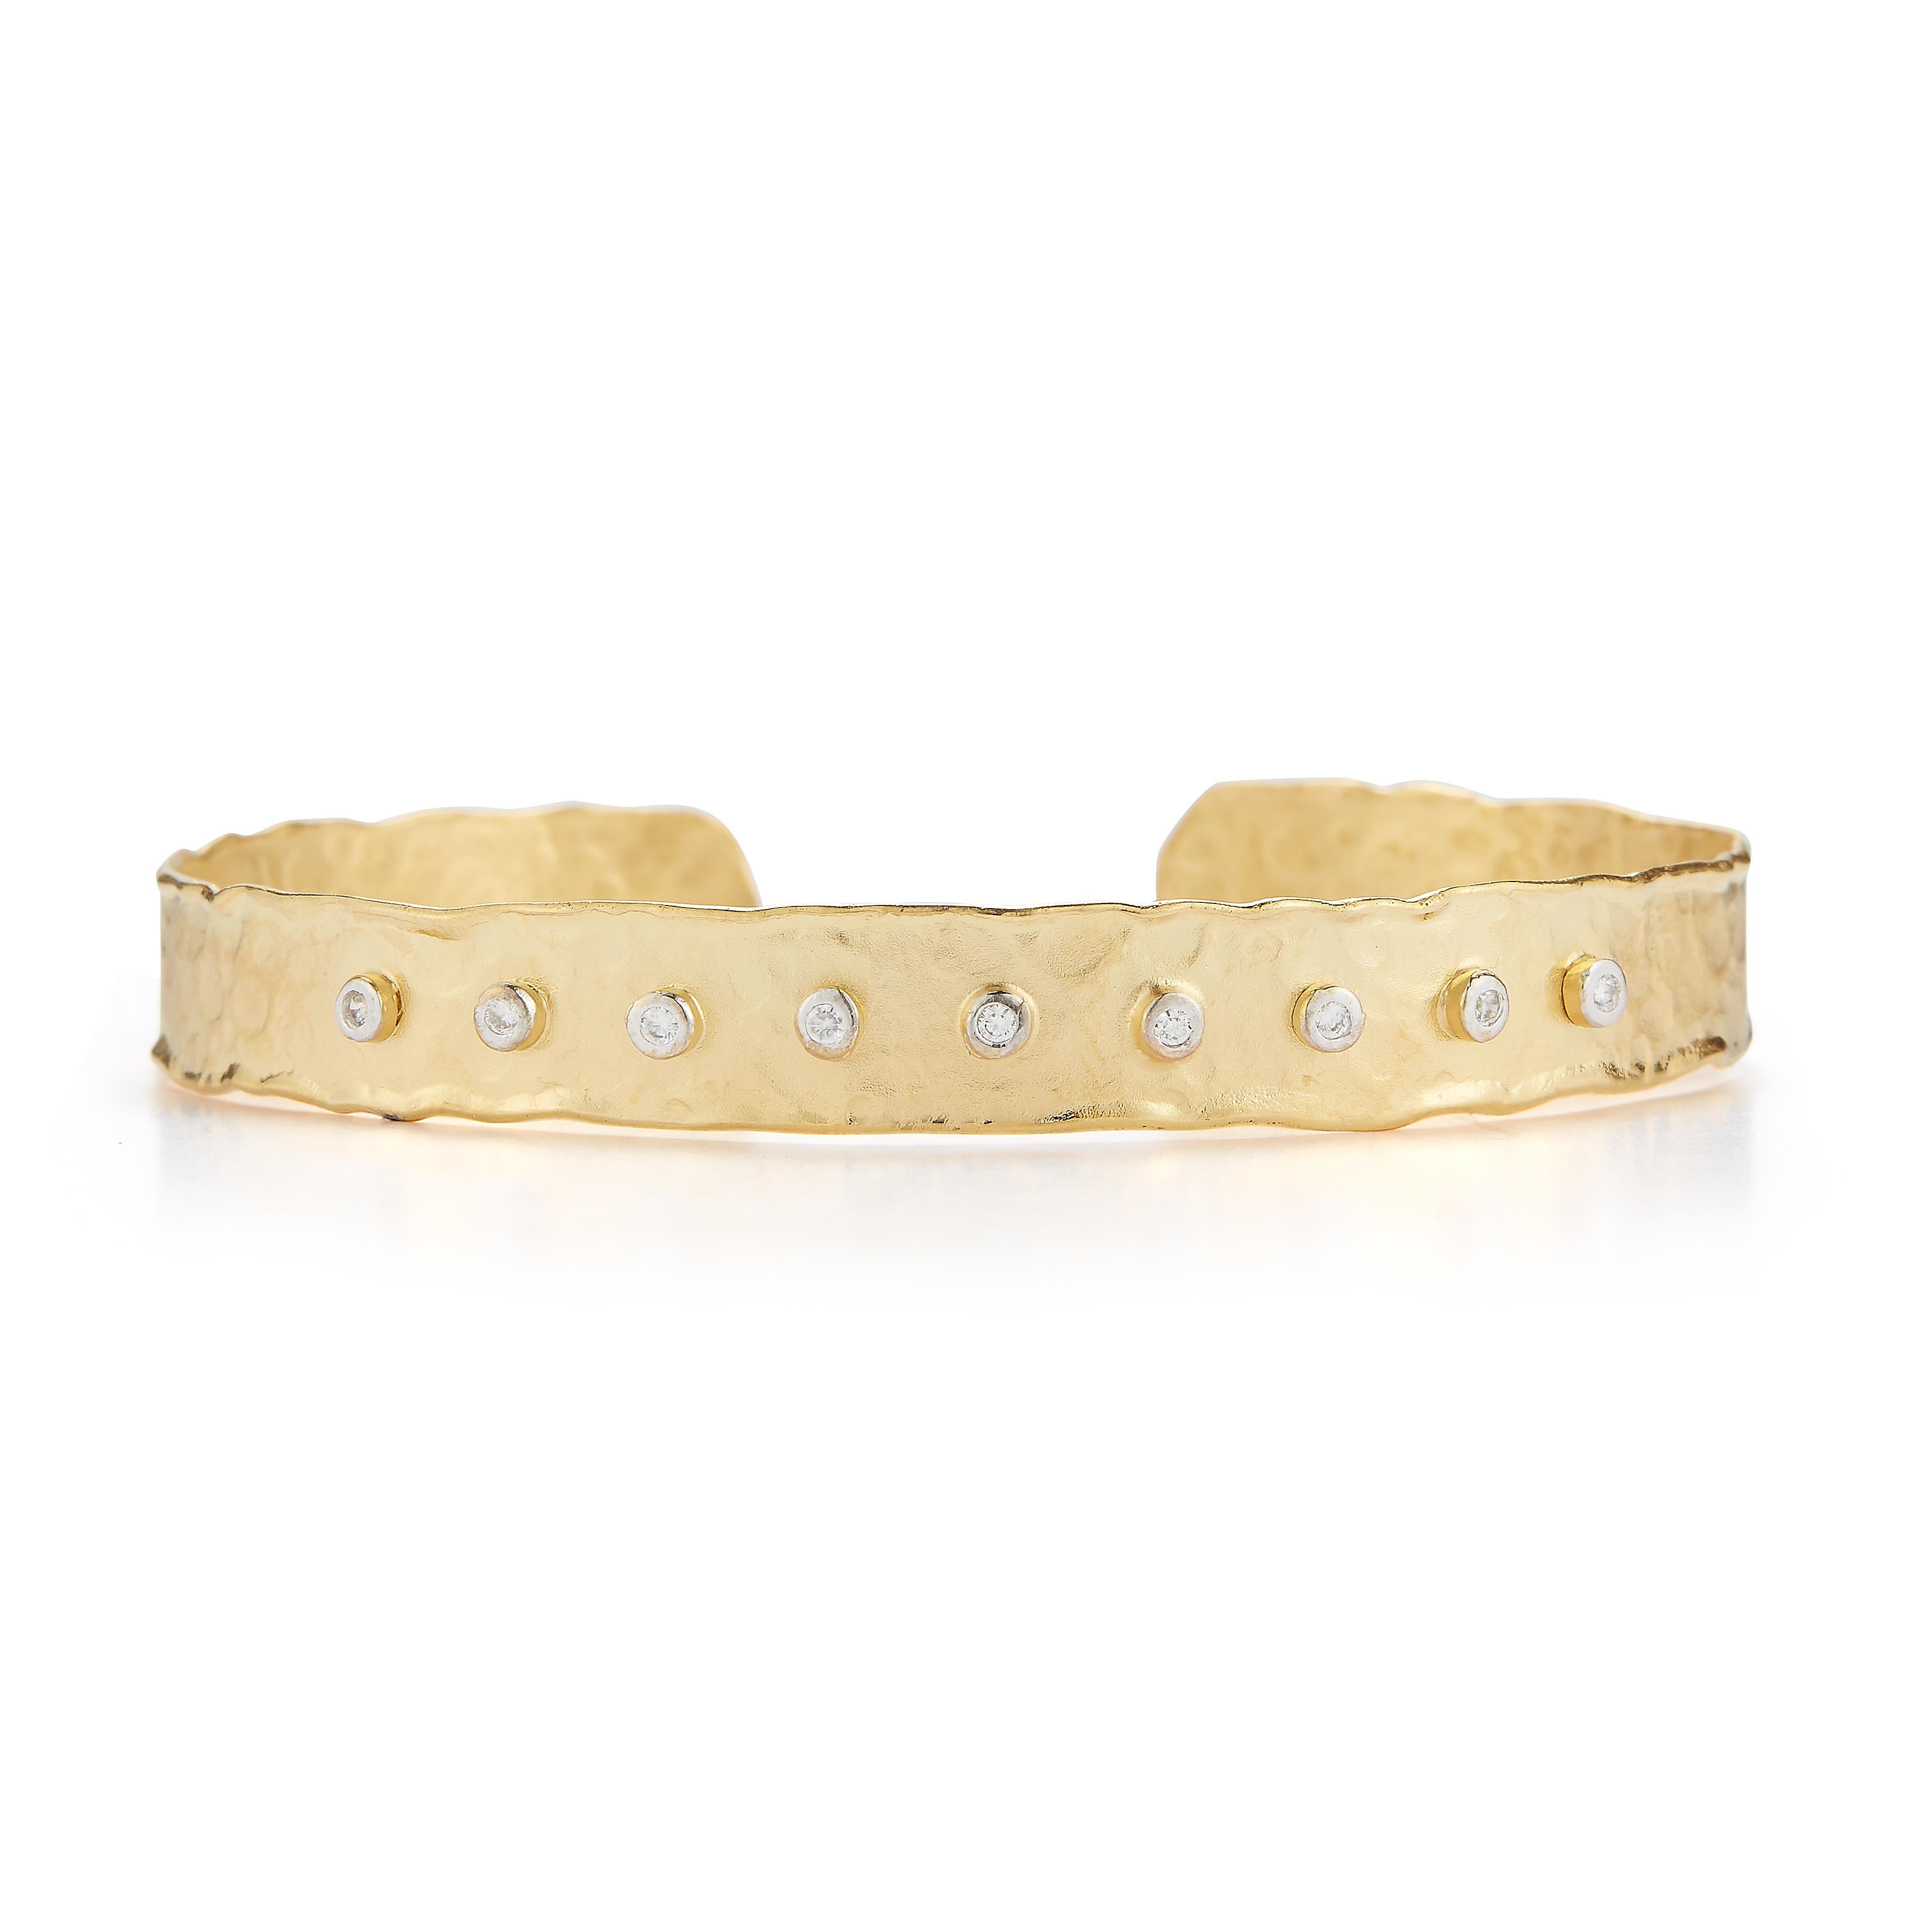 14 Karat Yellow Gold Hand-Crafted Matte and Hammer-Finished Scallop-Edged 8mm Narrow Cuff Bracelet, Dotted with 0.14 Carats of Bezel Set Diamonds.
